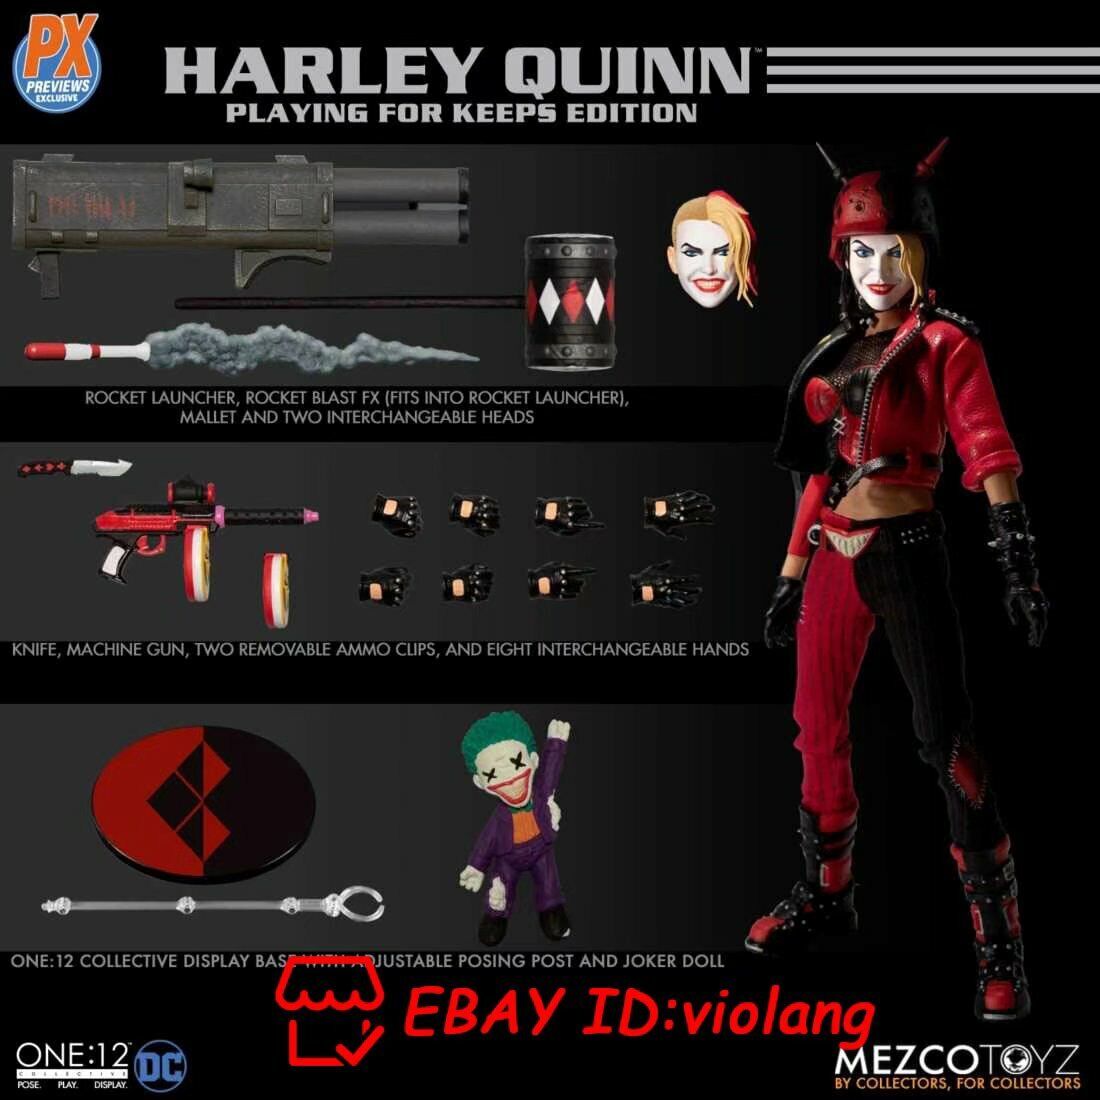 New Mezco One:12 Collective Harley Quinn PX 6inch Limited Action Figure In Stock